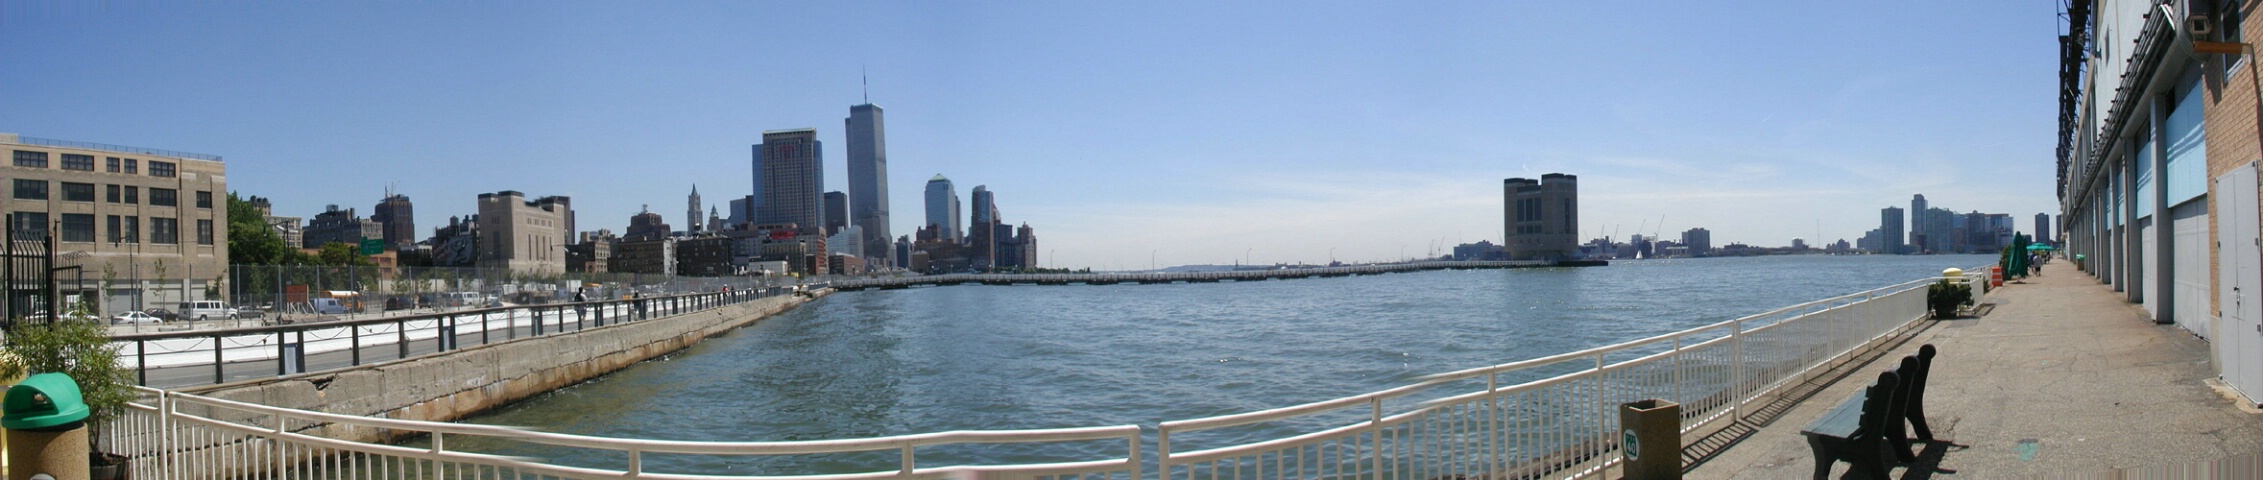 Pan from Pier 40, July 27, 2001